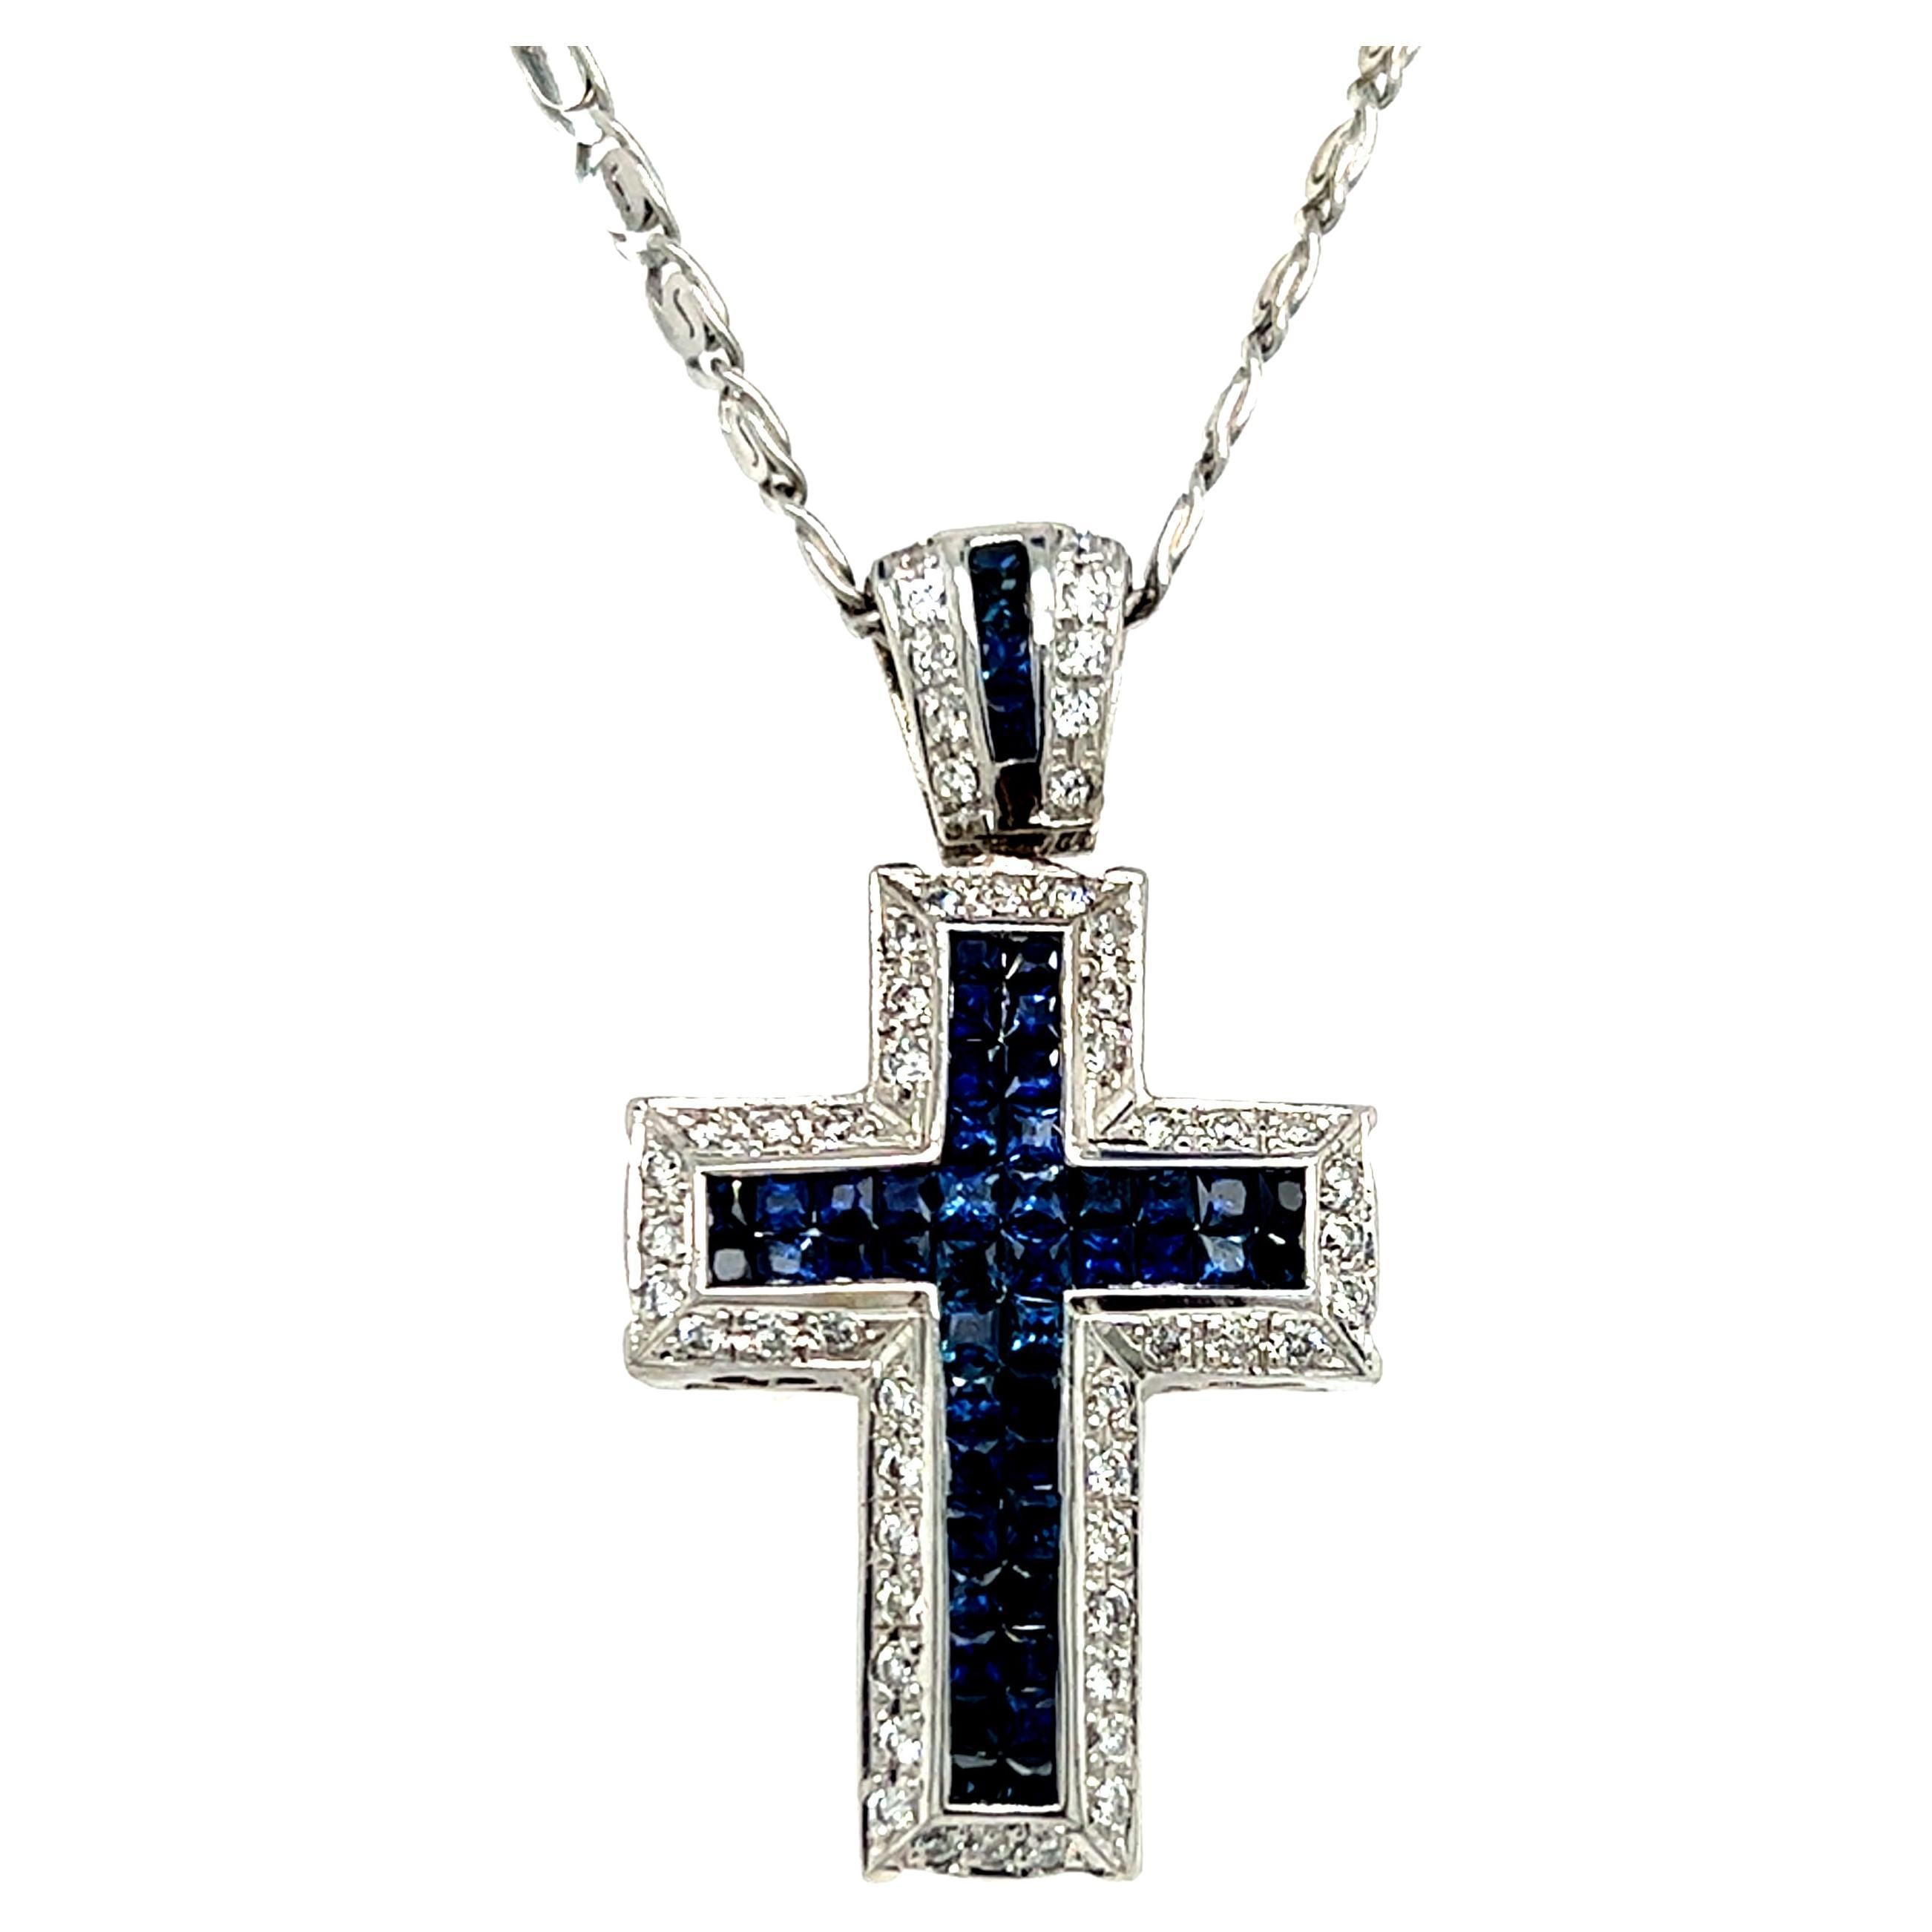 One 14 karat white gold cross pendant set with forty-four (44) princess cut sapphires, approximately 2.35 carat total weight, and forty-four (44) round brilliant cut diamonds, approximately 1.00 carat total weight with matching H/I color and SI